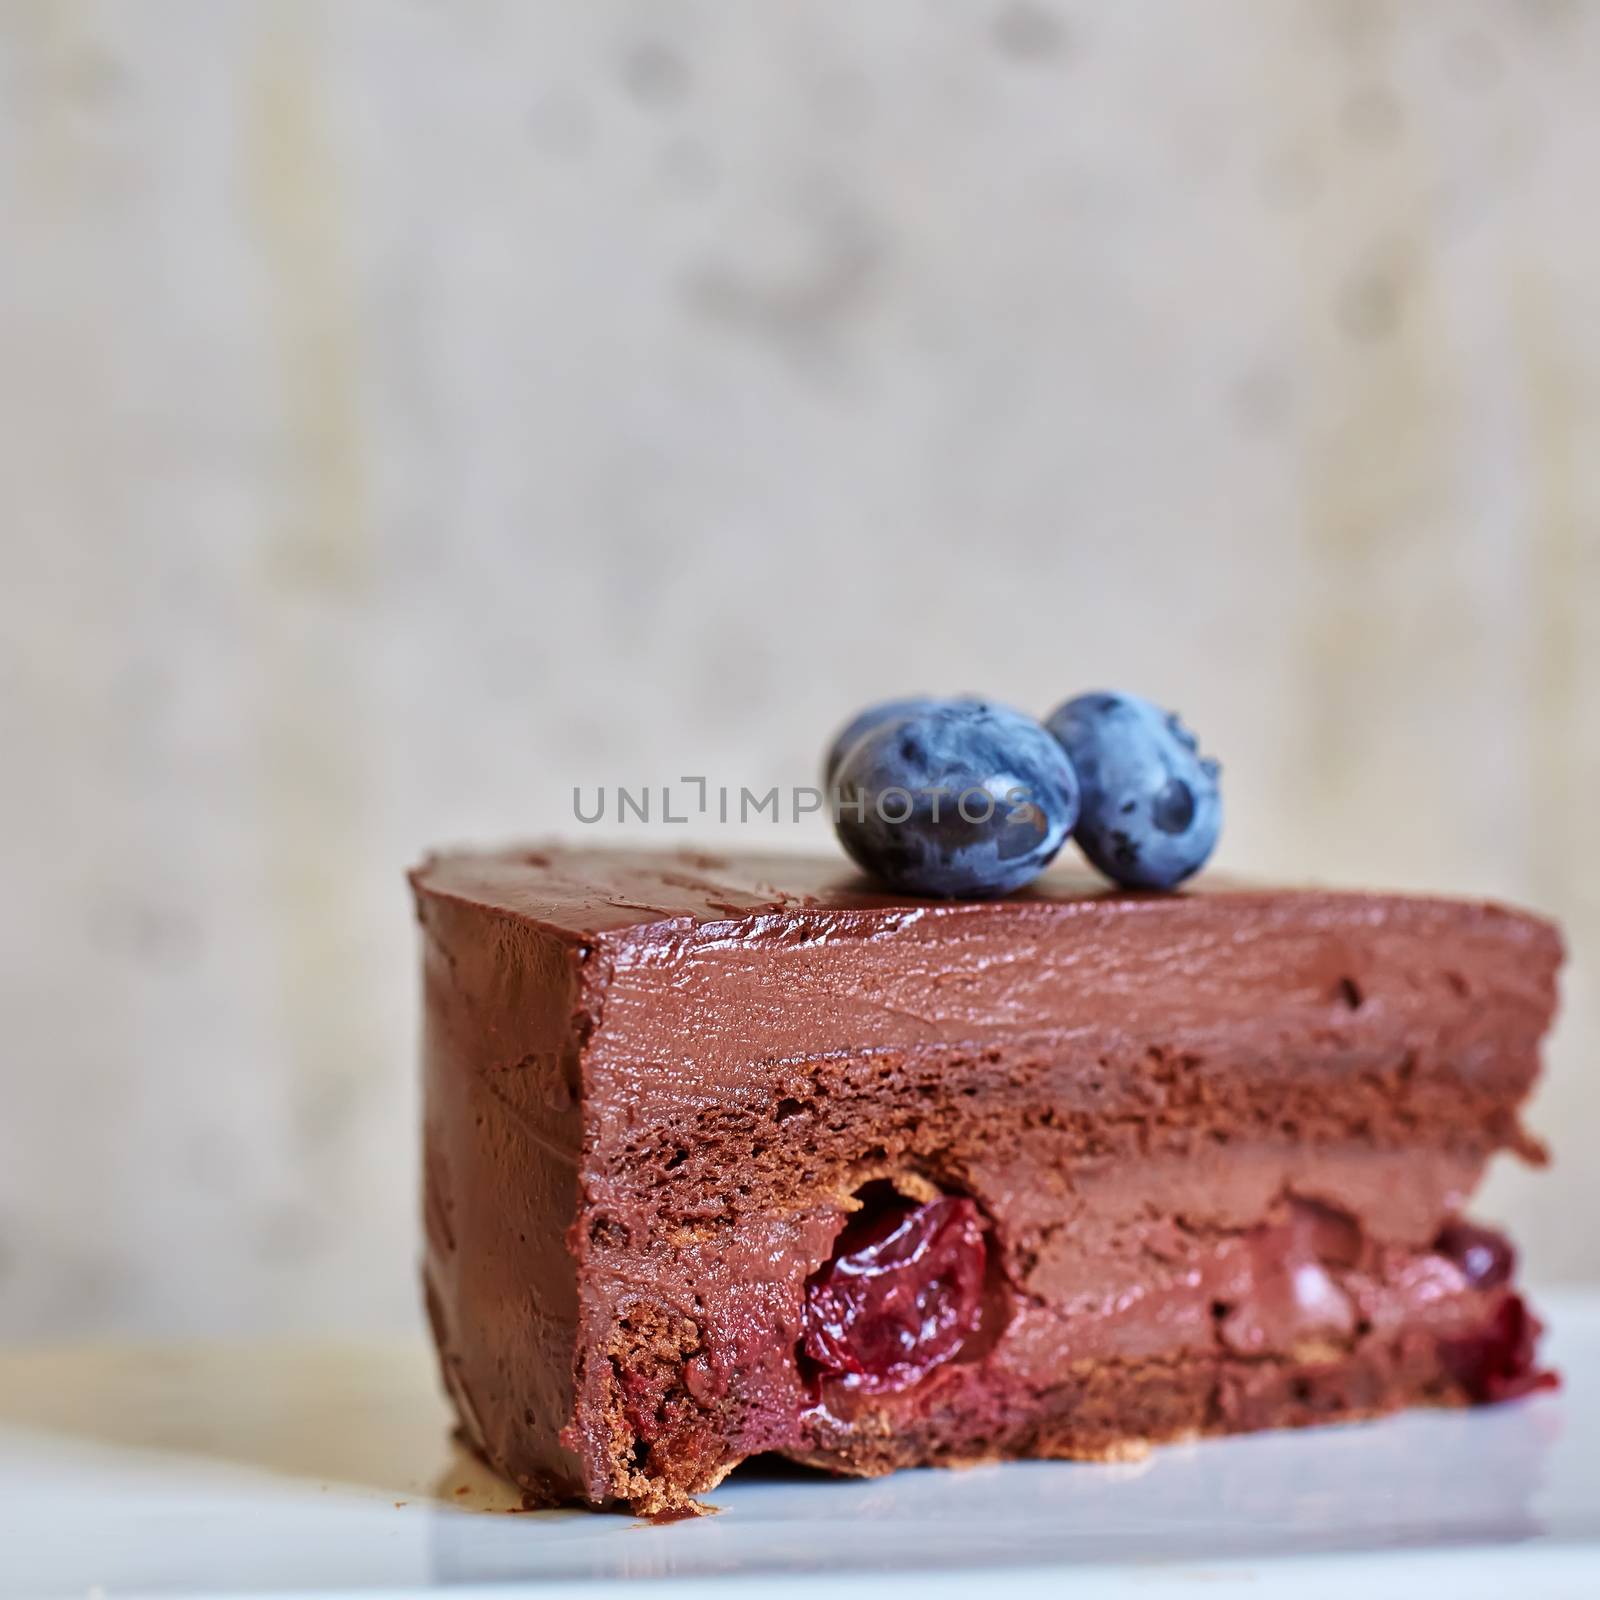 Piece of chocolate cake on concrete background